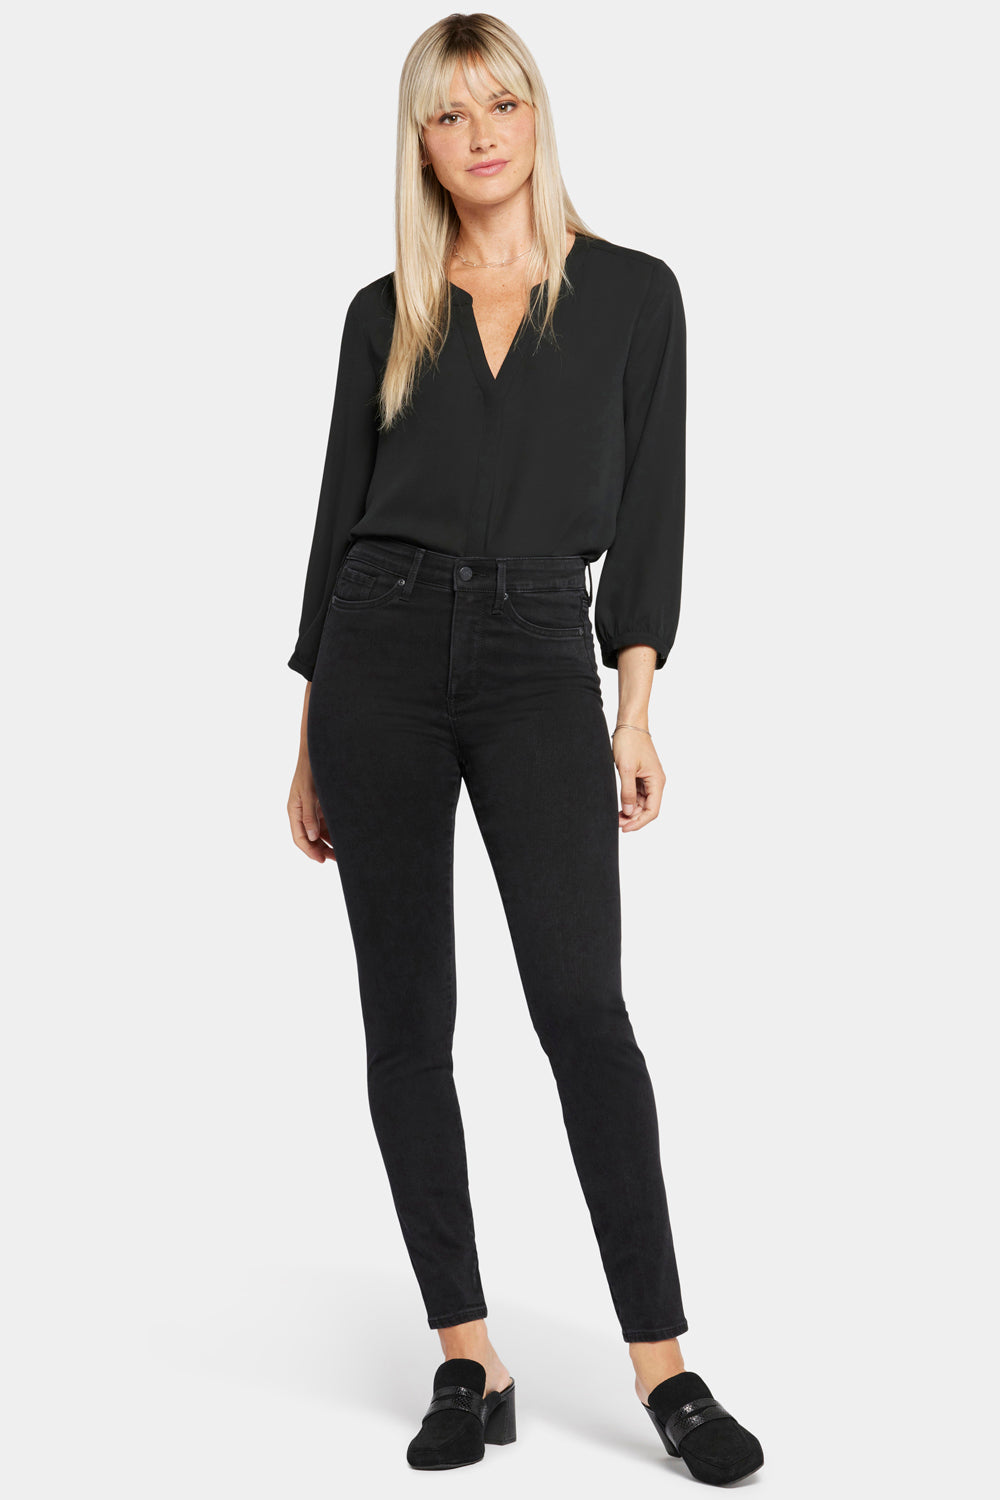 NYDJ Le Silhouette Ami Skinny Jeans In Petite With High Rise - Stellar